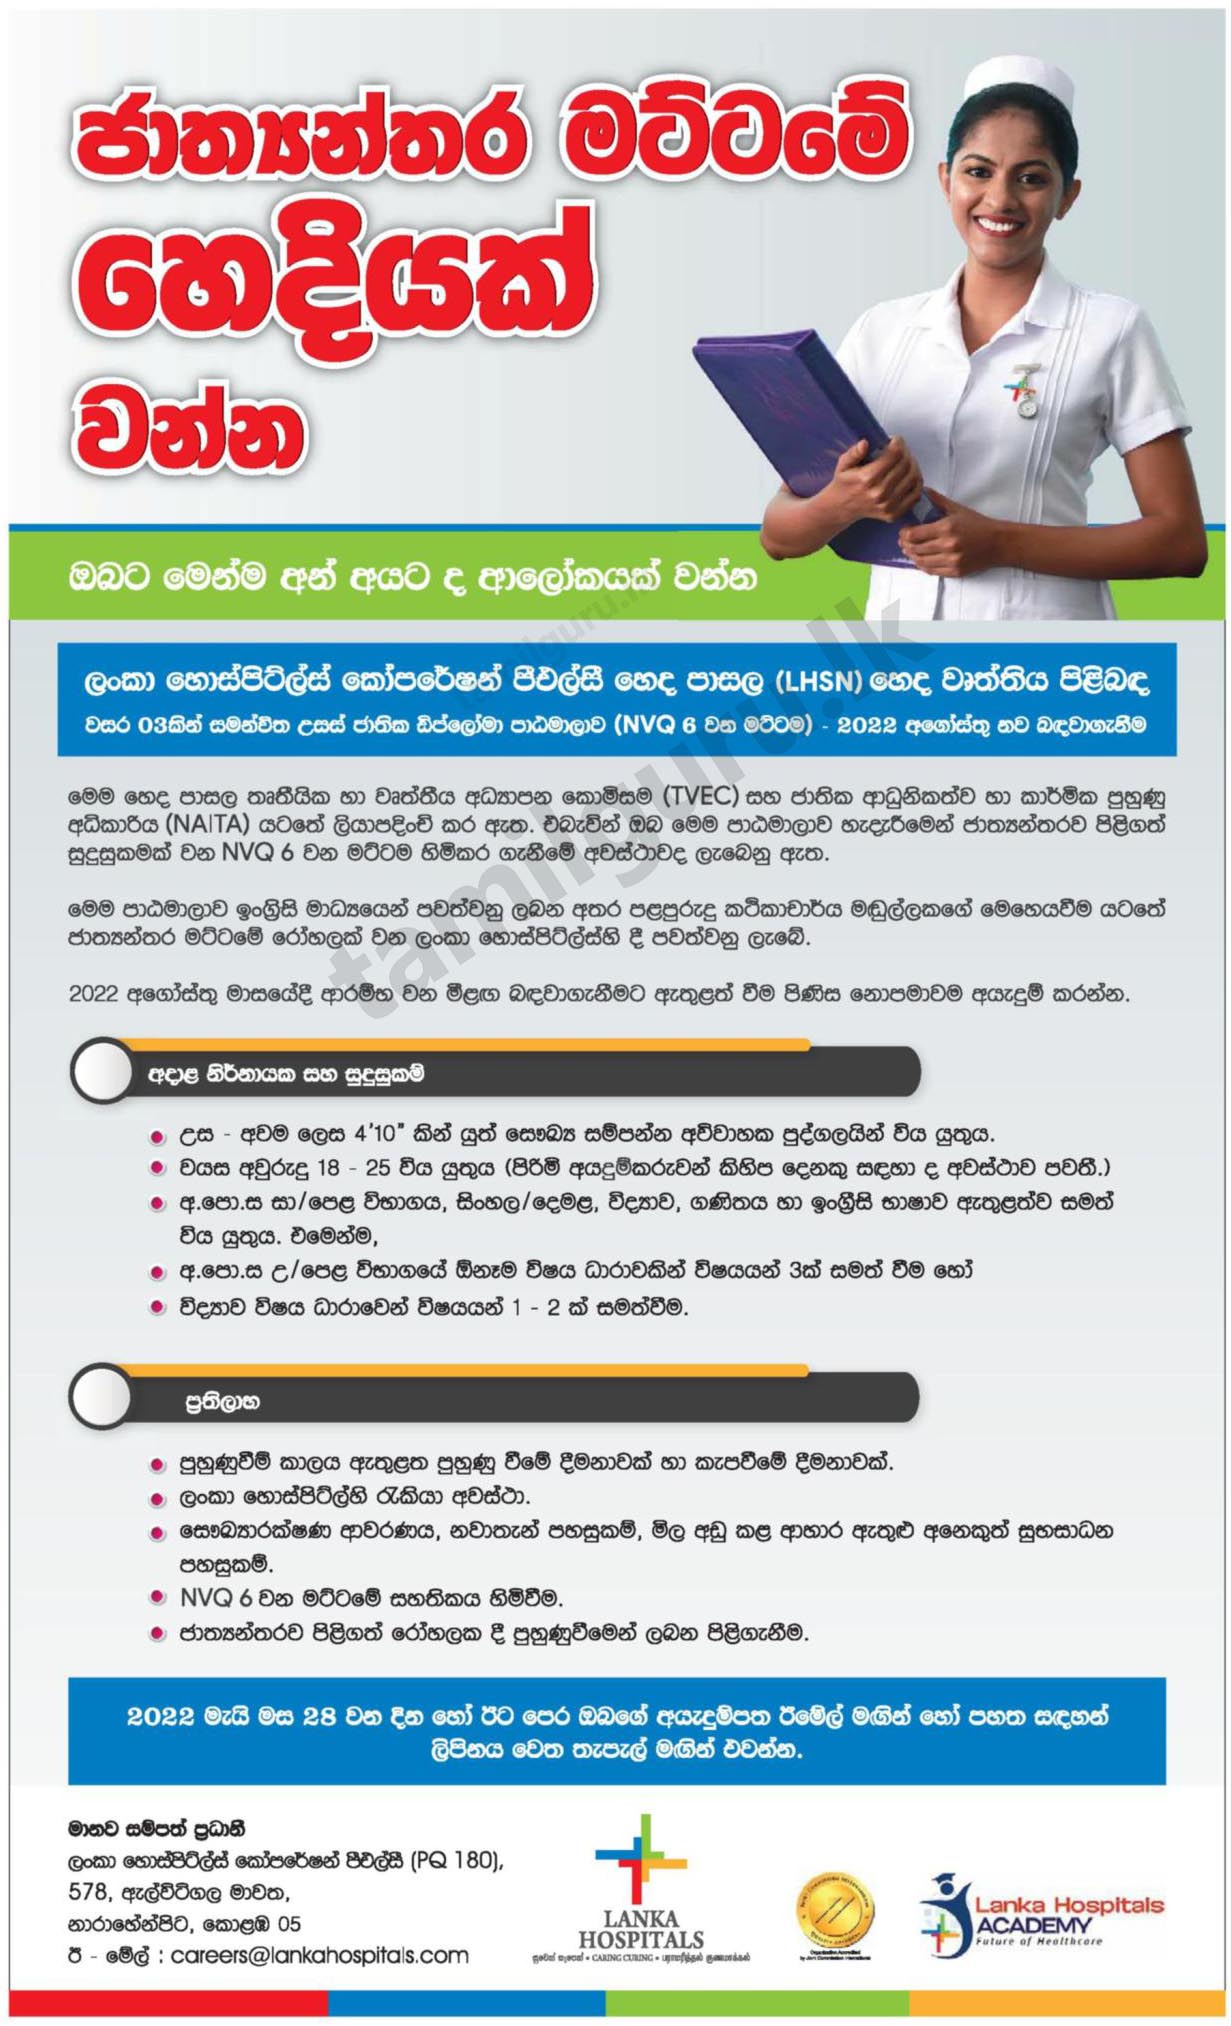 Higher National Diploma (HND) in Nursing Training Course (NVQ 6) Intake 2022 - Lanka Hospitals Academy (Details in Sinhala)